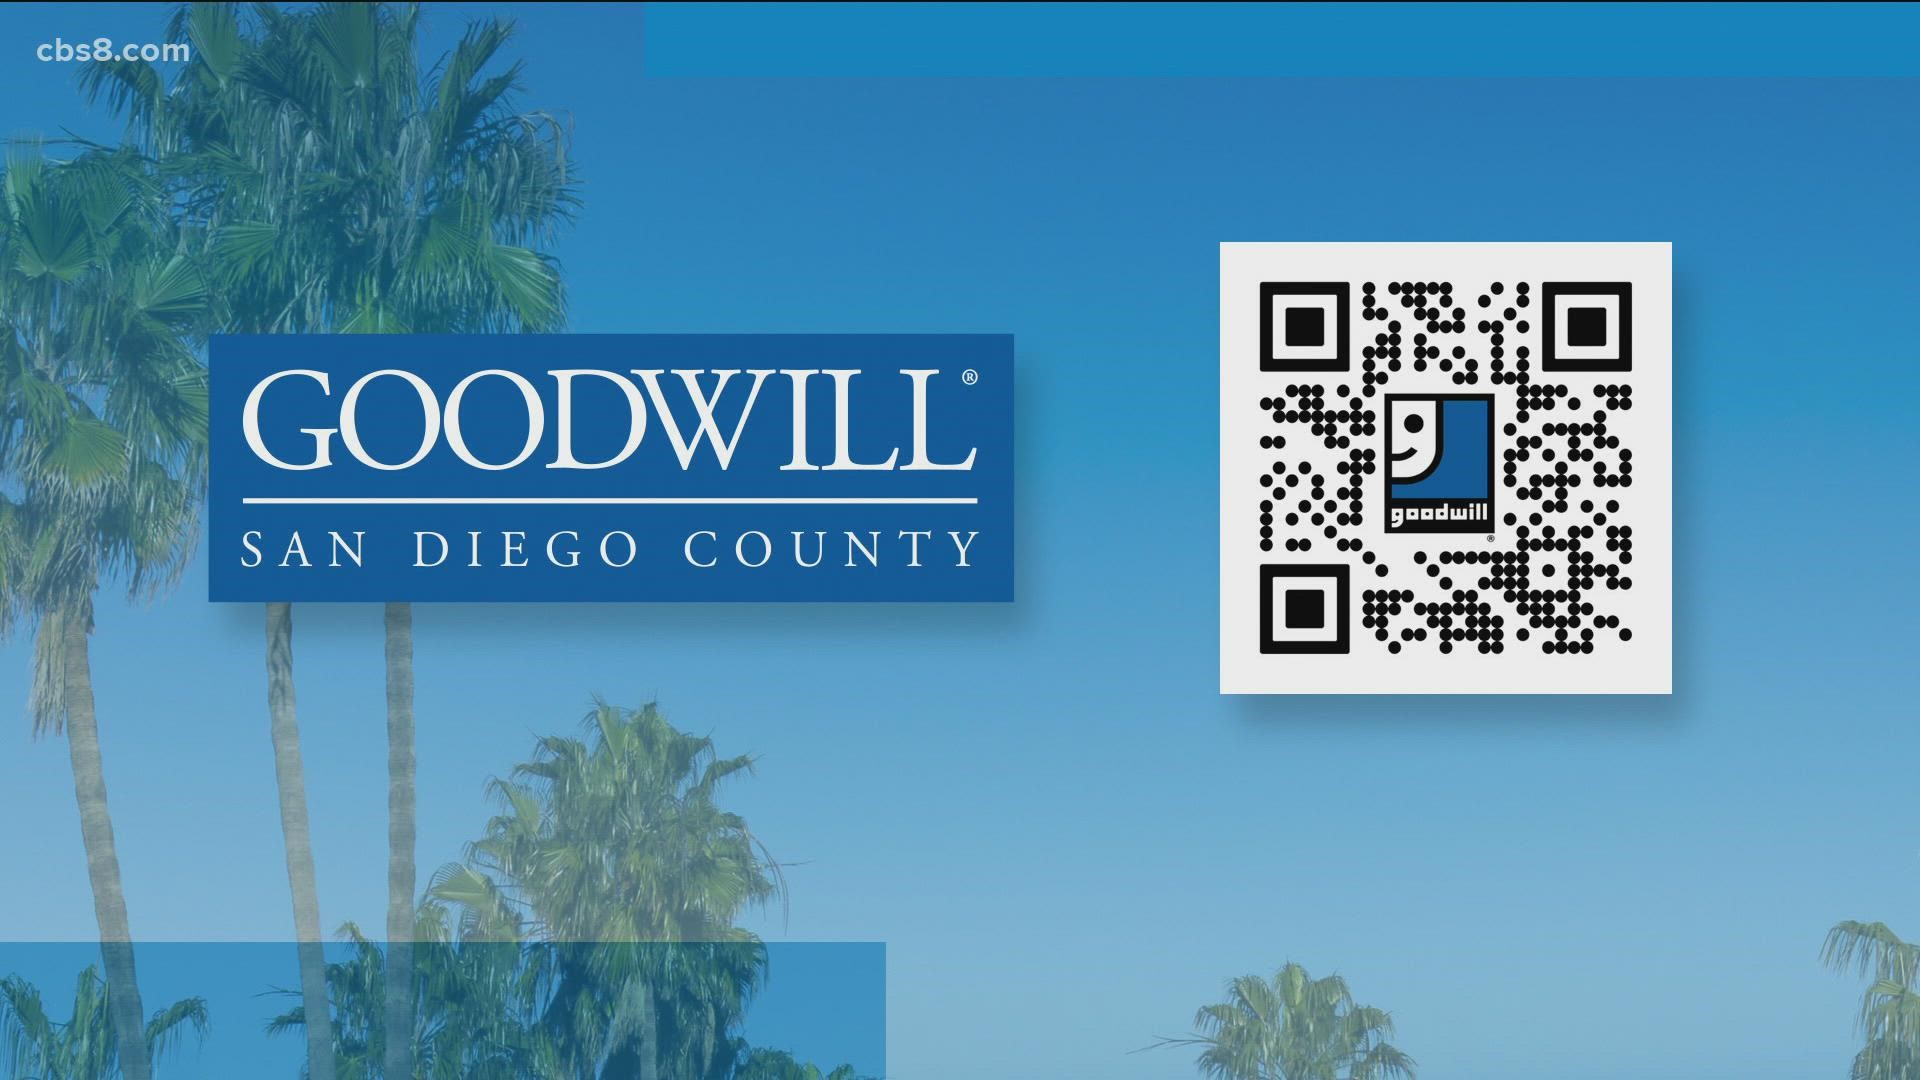 Next week, all week long, Goodwill will be hosting job fairs, employment panels and more.